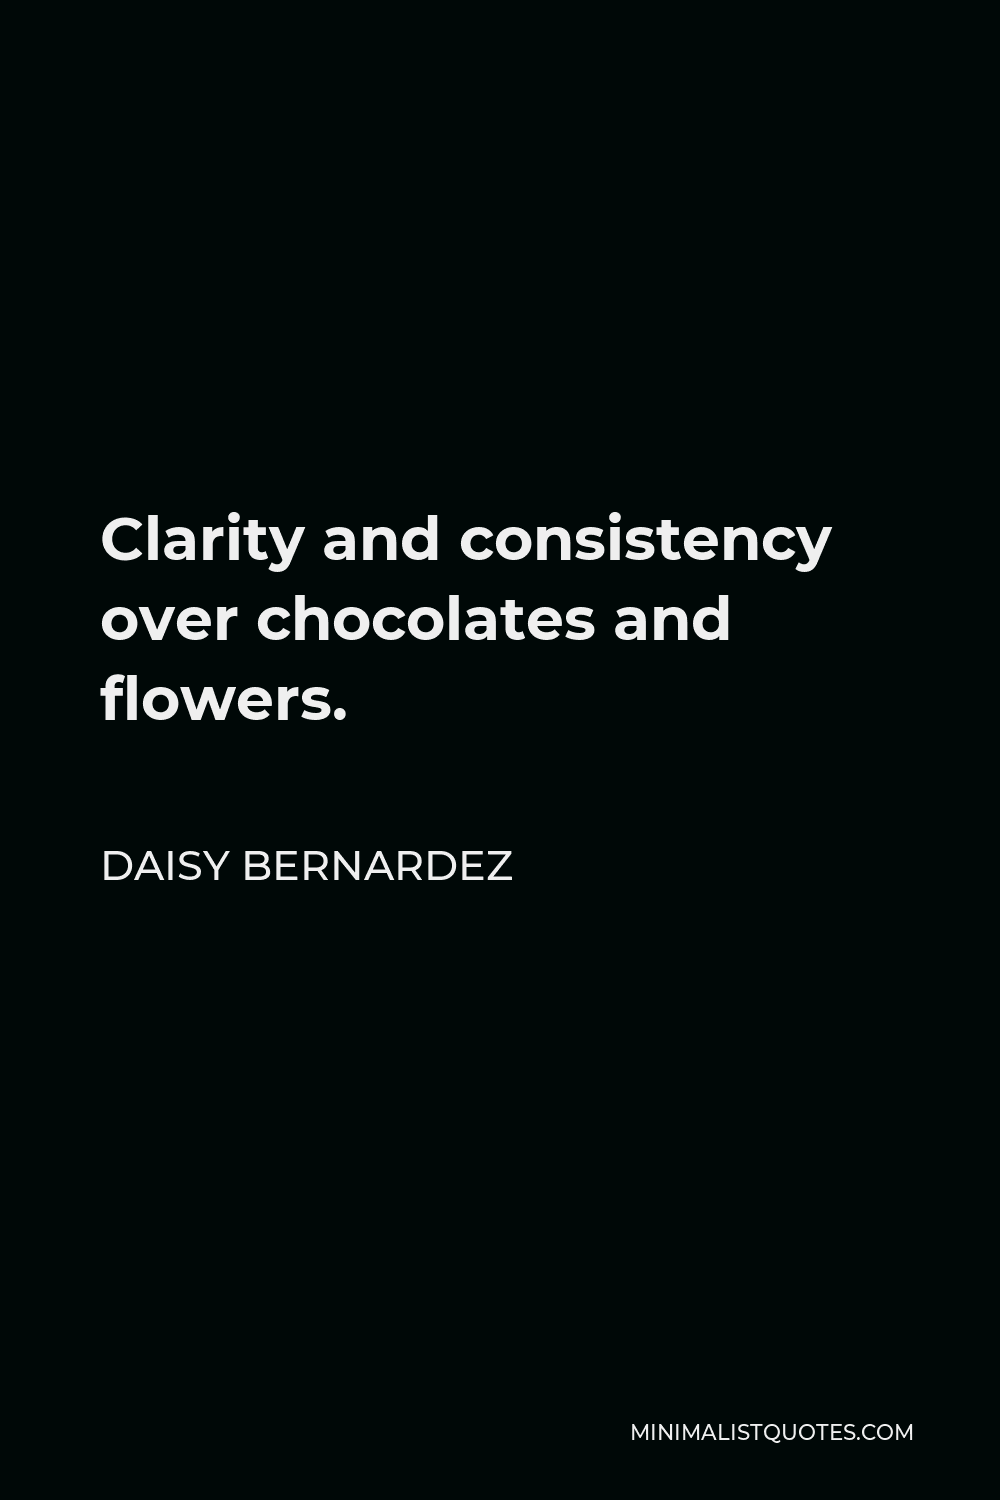 Daisy Bernardez Quote - Clarity and consistency over chocolates and flowers.